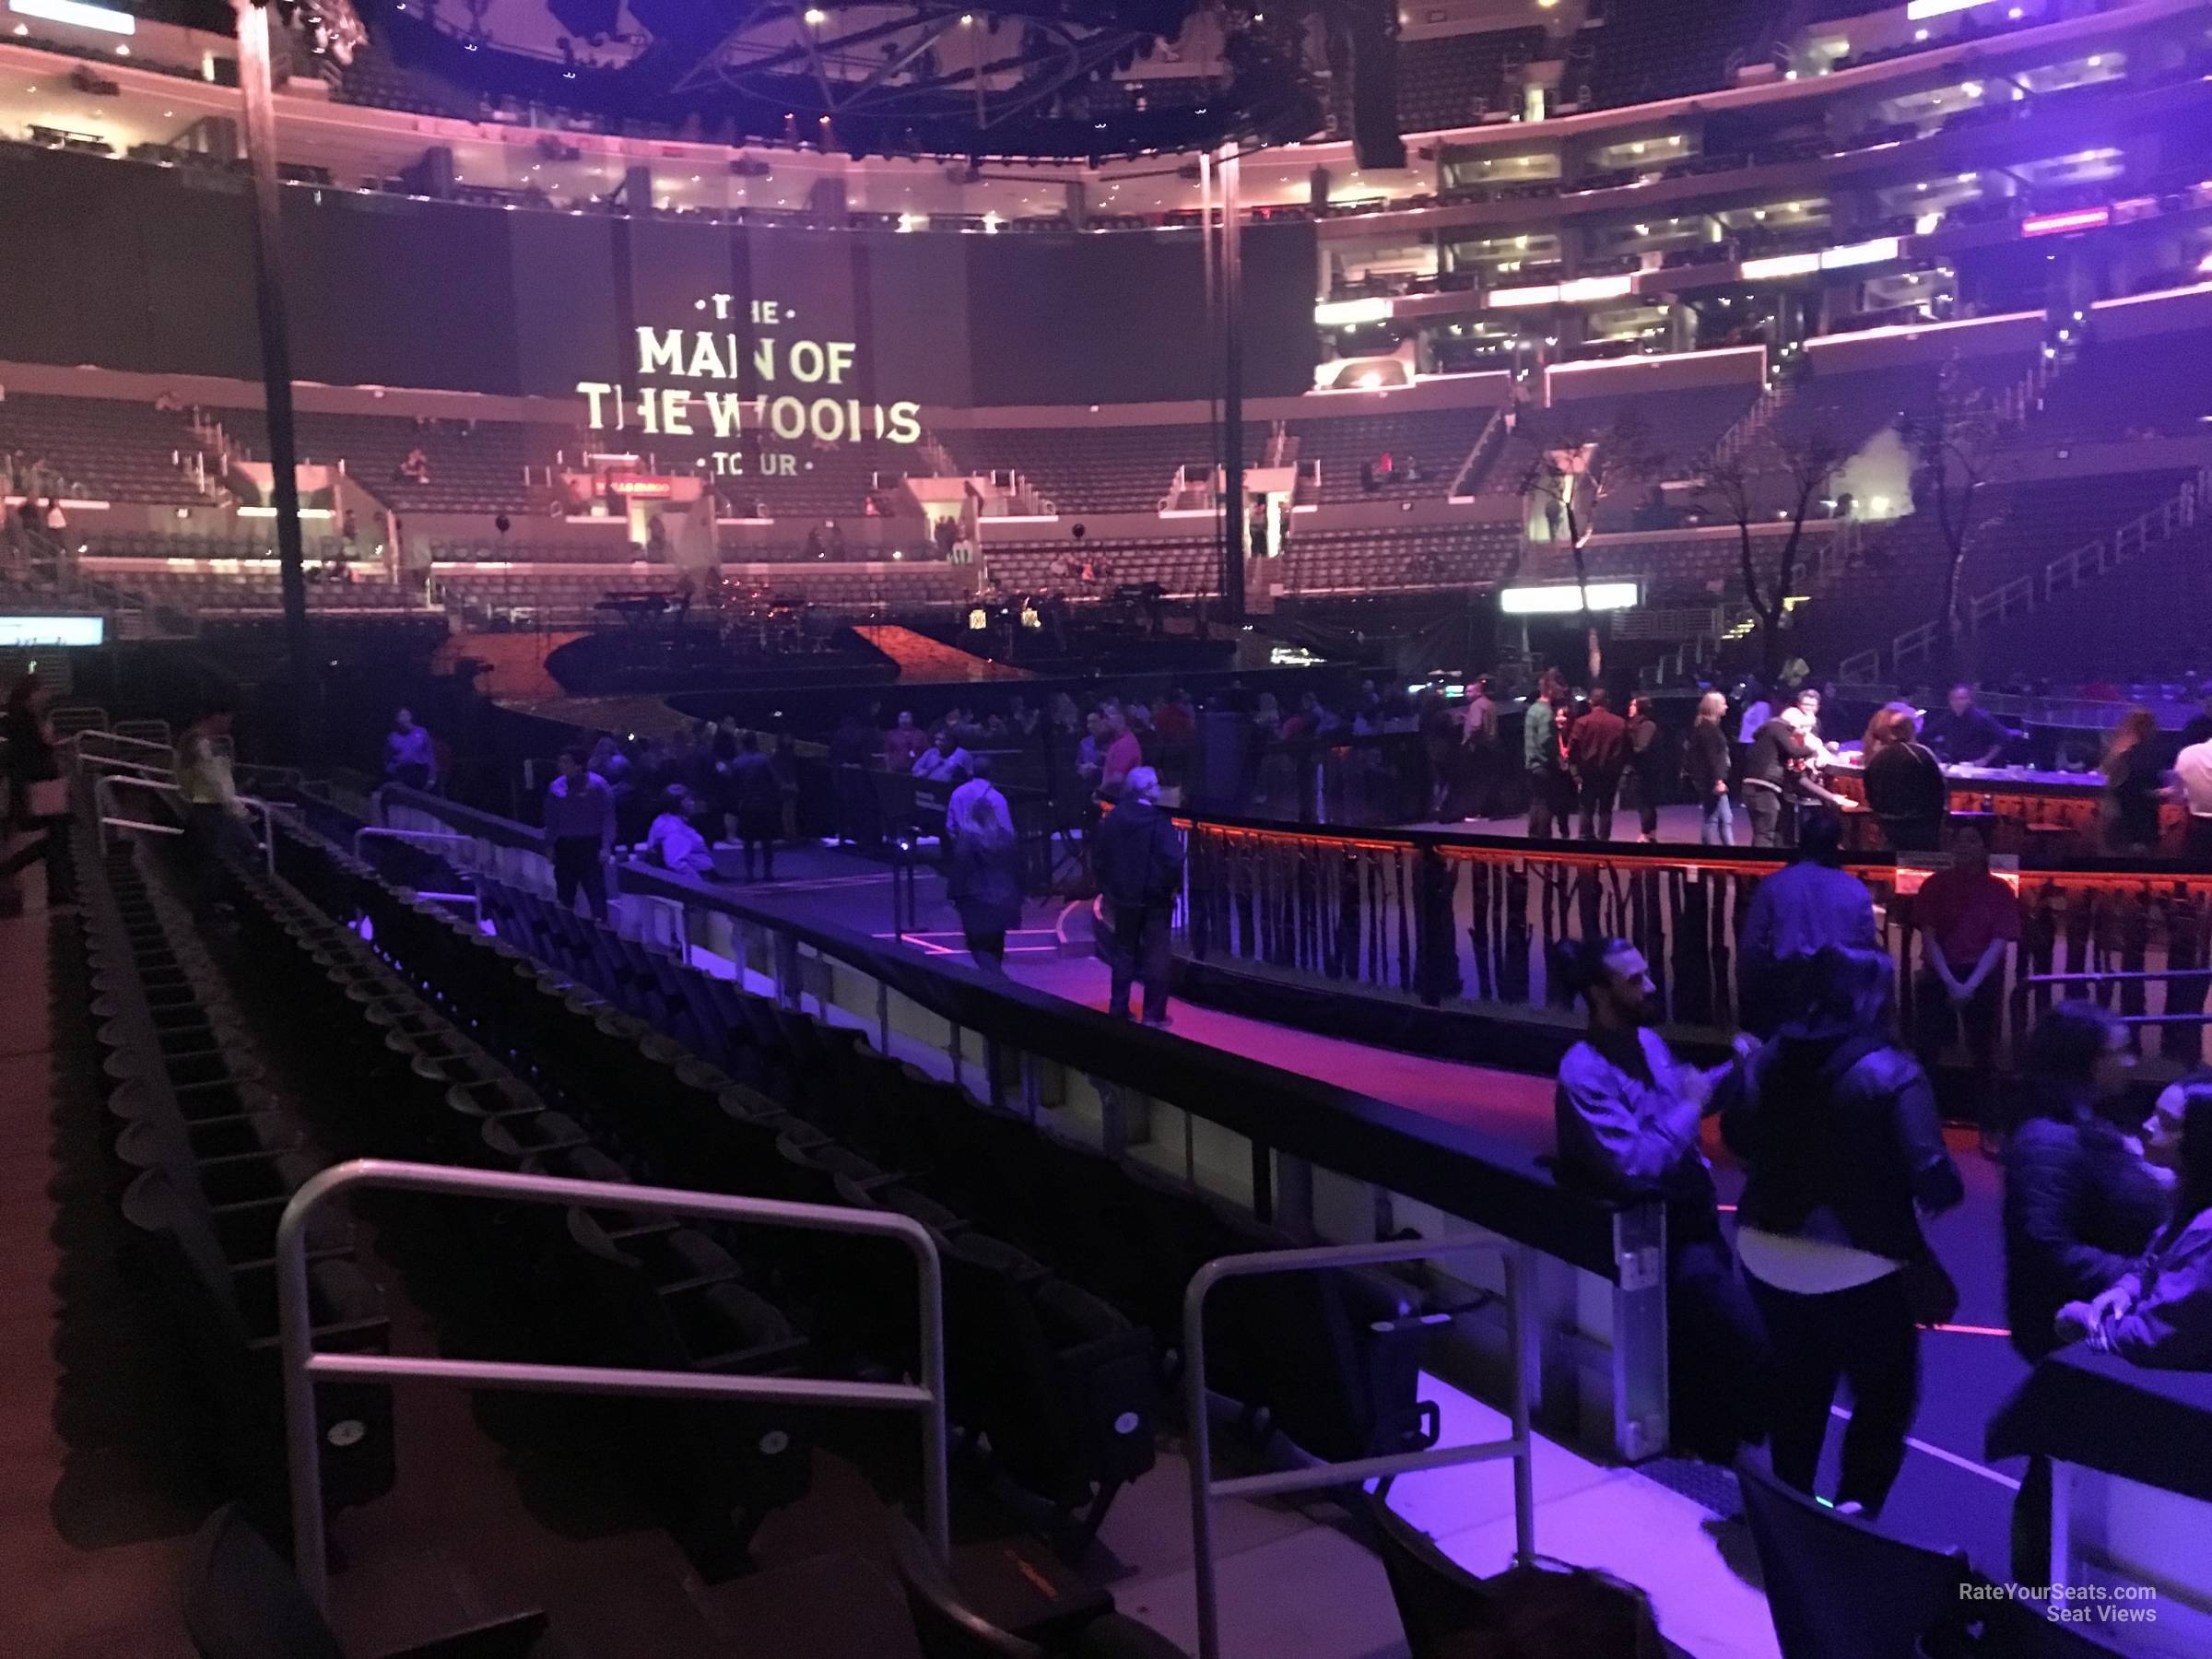 section 111, row 5 seat view  for concert - crypto.com arena